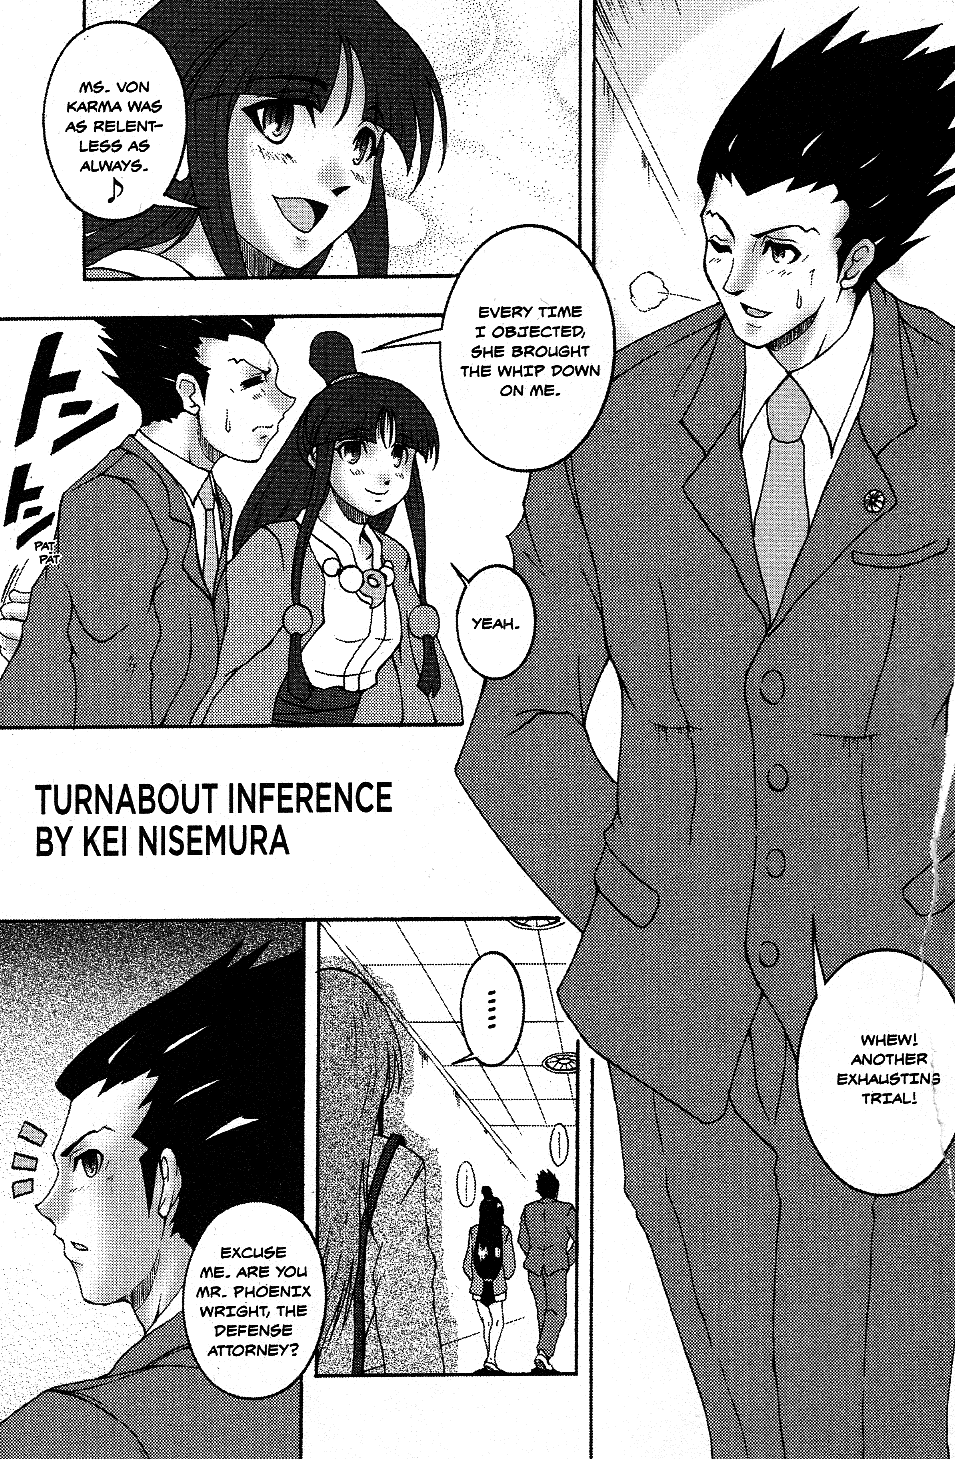 Phoenix Wright: Ace Attorney - Official Casebook Vol.1 Chapter 2: Turnabout Inference - By Kei Nisemura - Picture 1